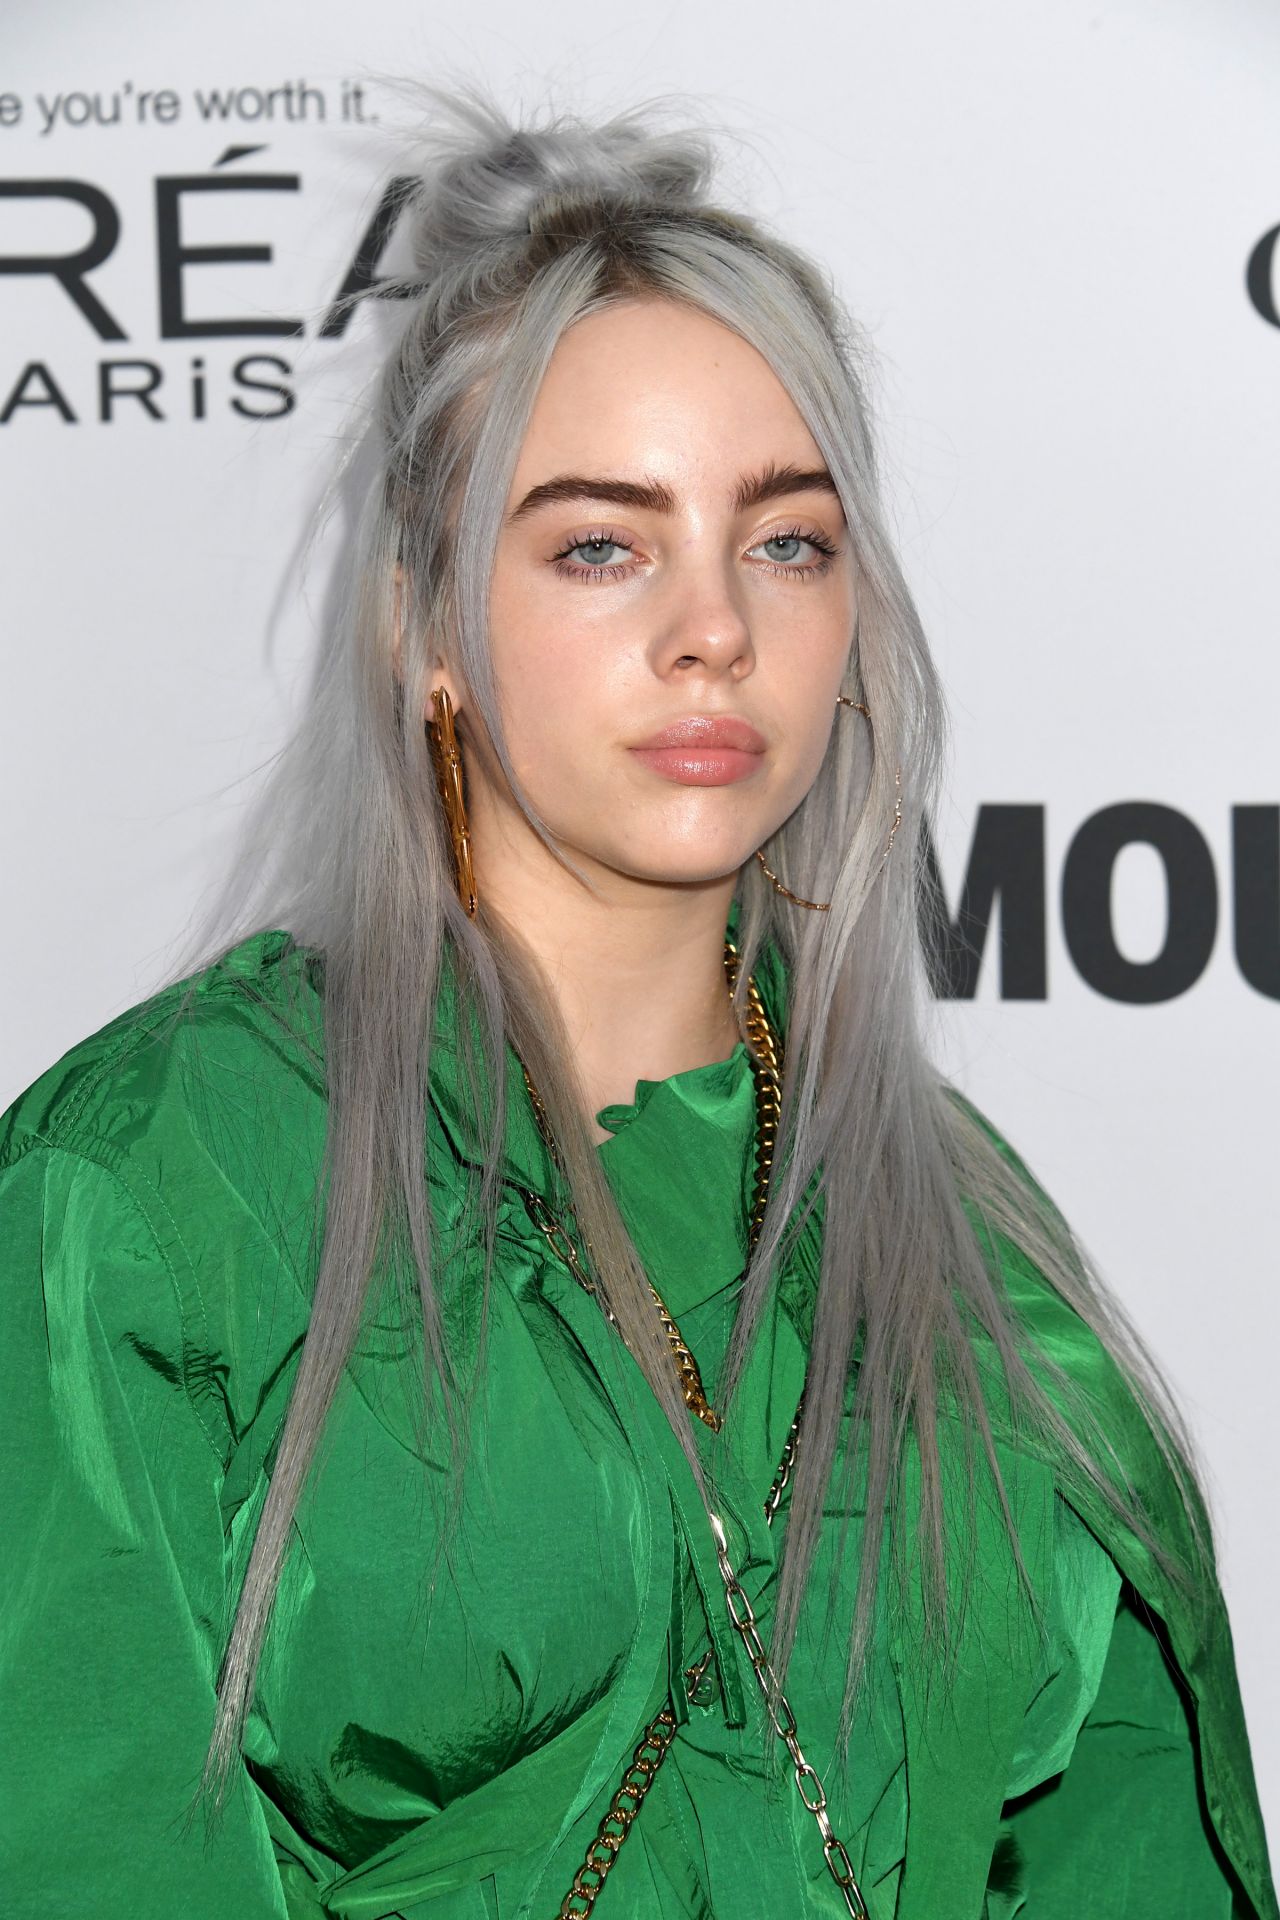 Billie Eilish – Glamour Women of the Year 2017 in New York City1280 x 1920